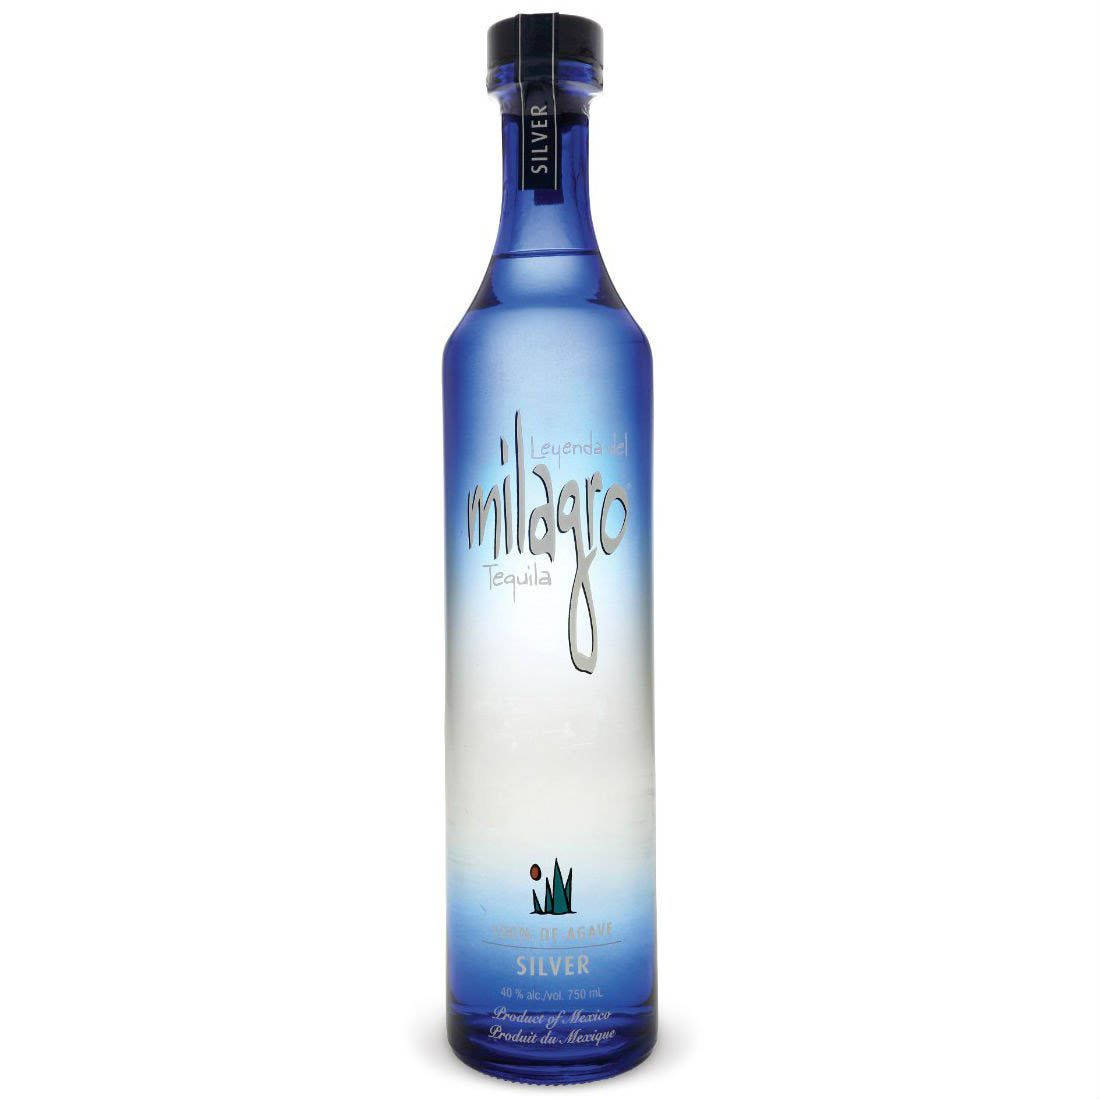 Milagro Tequila 1100 X 1100 Wallpaper